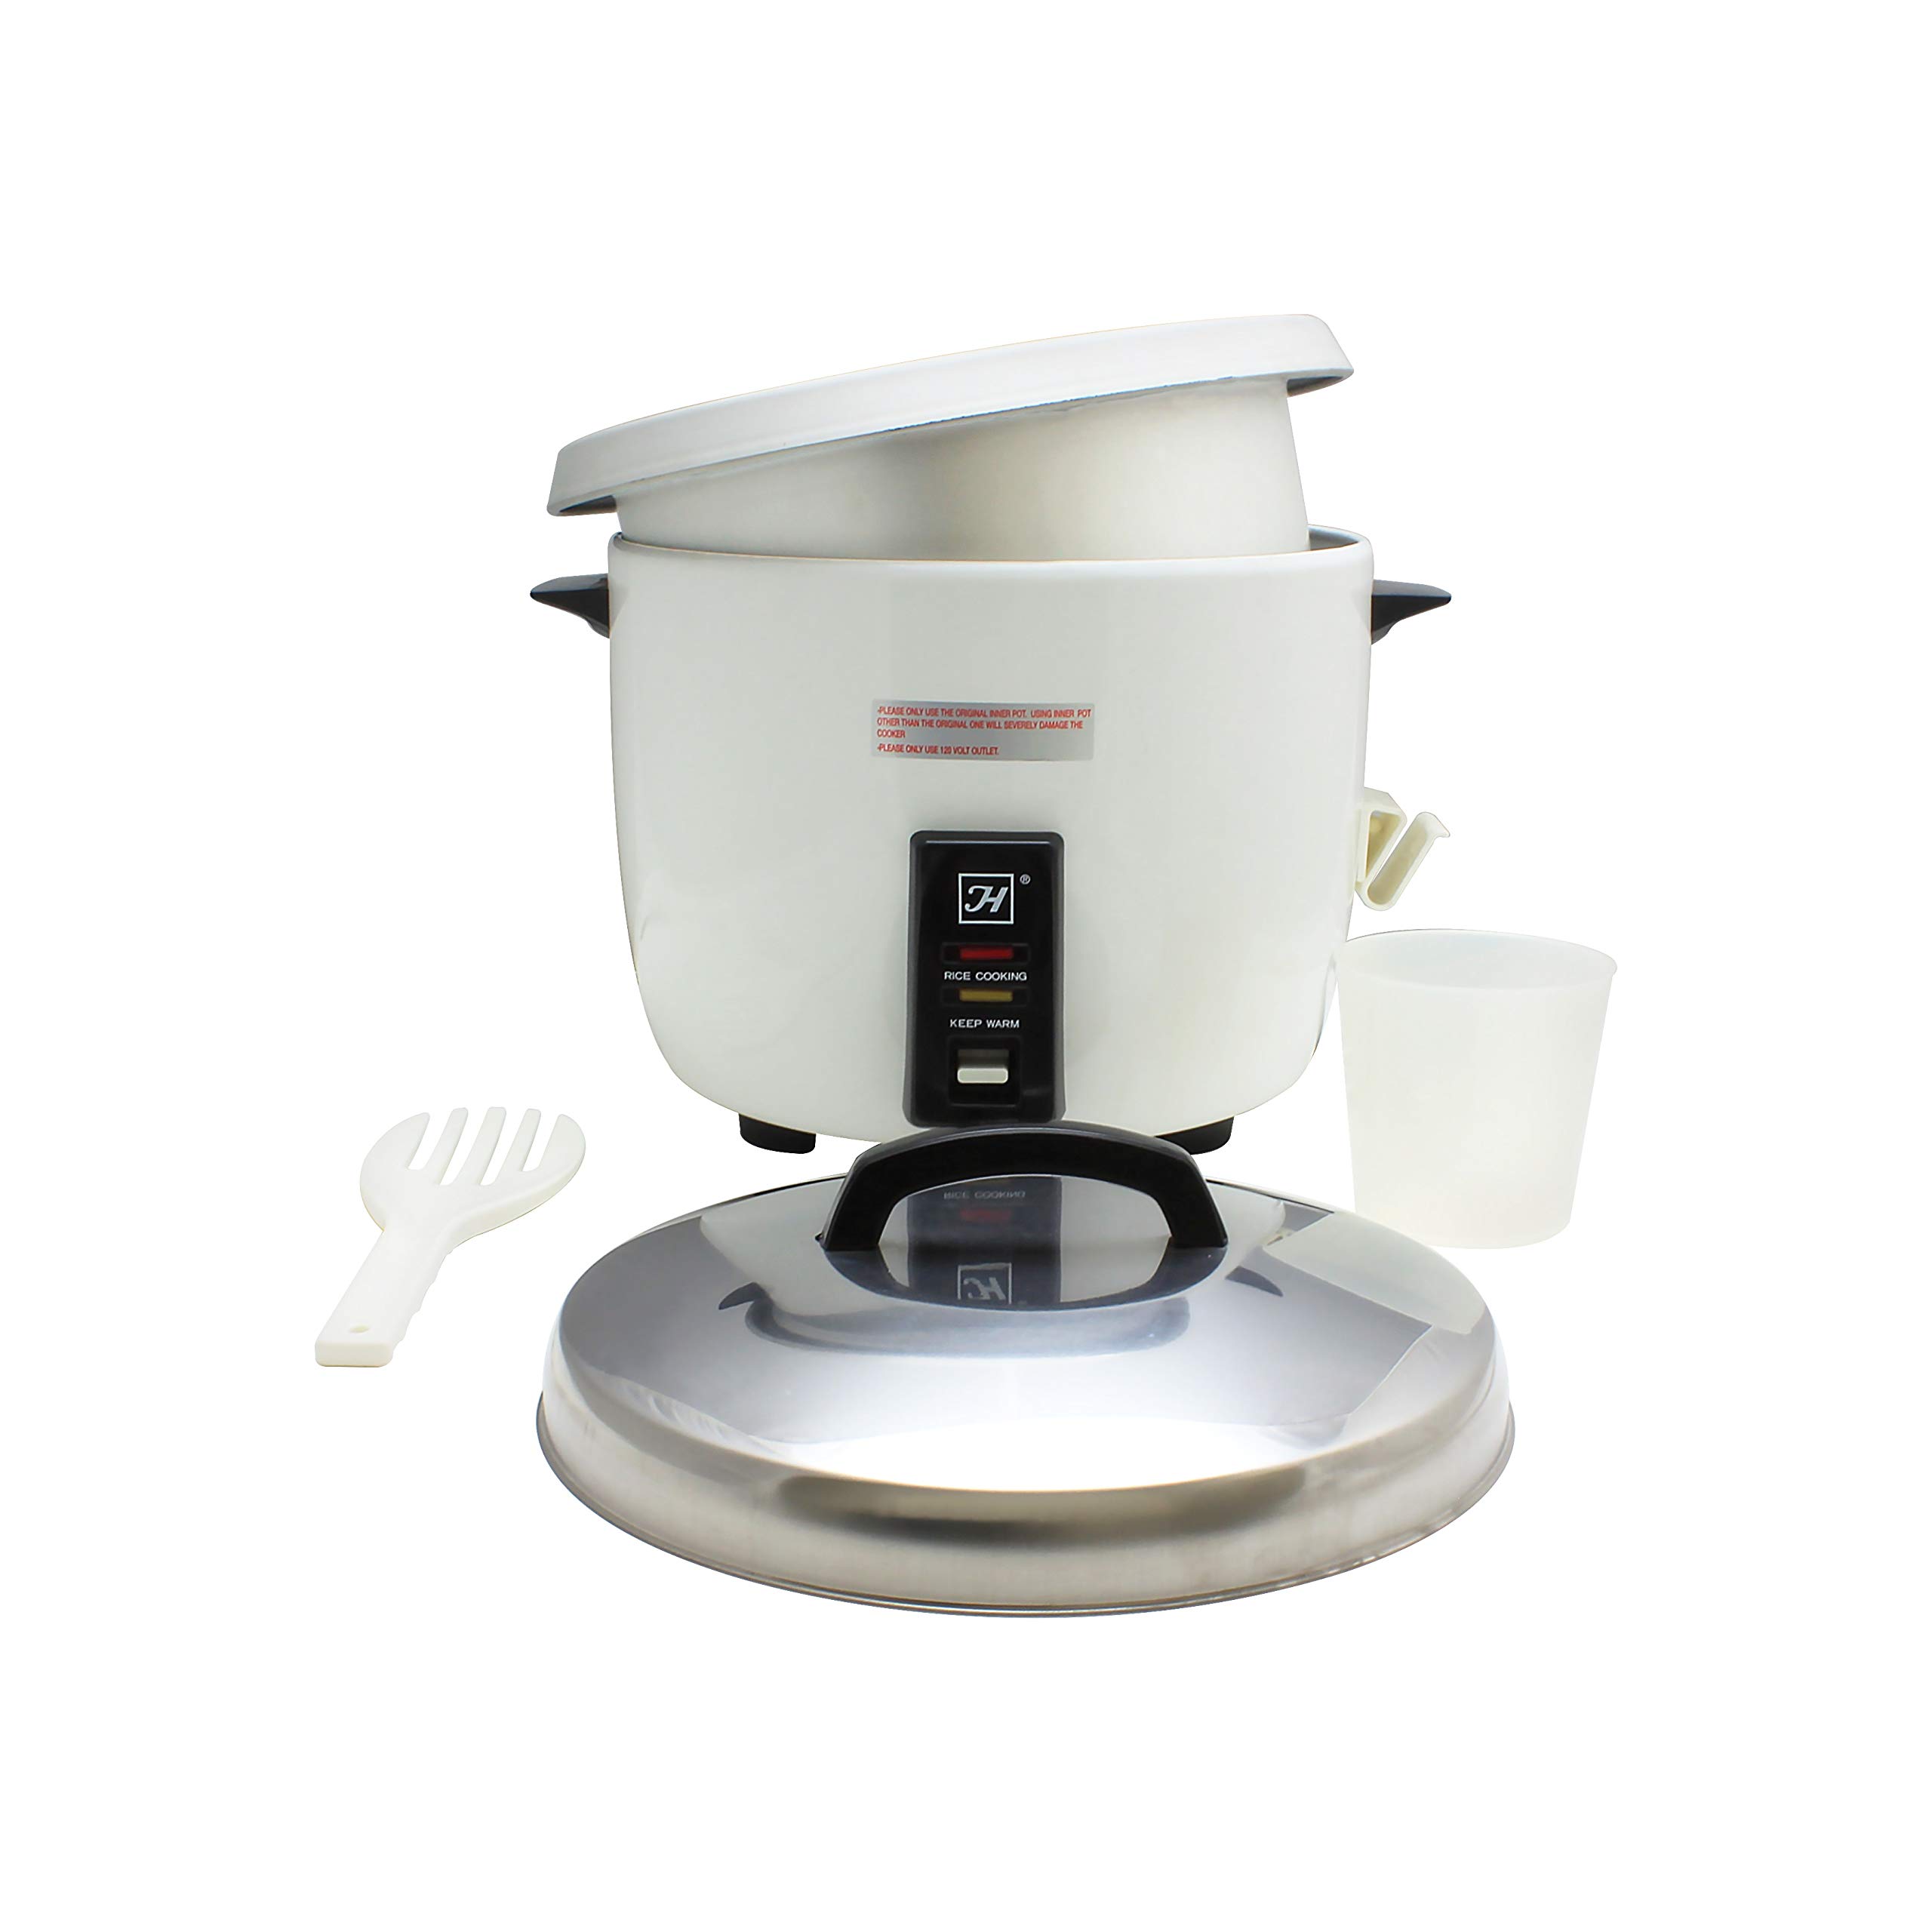 Thunder Group SEJ50000 30-Cup (Uncooked) 60-Cup (Cooked) Rice Cooker/Warmer, White